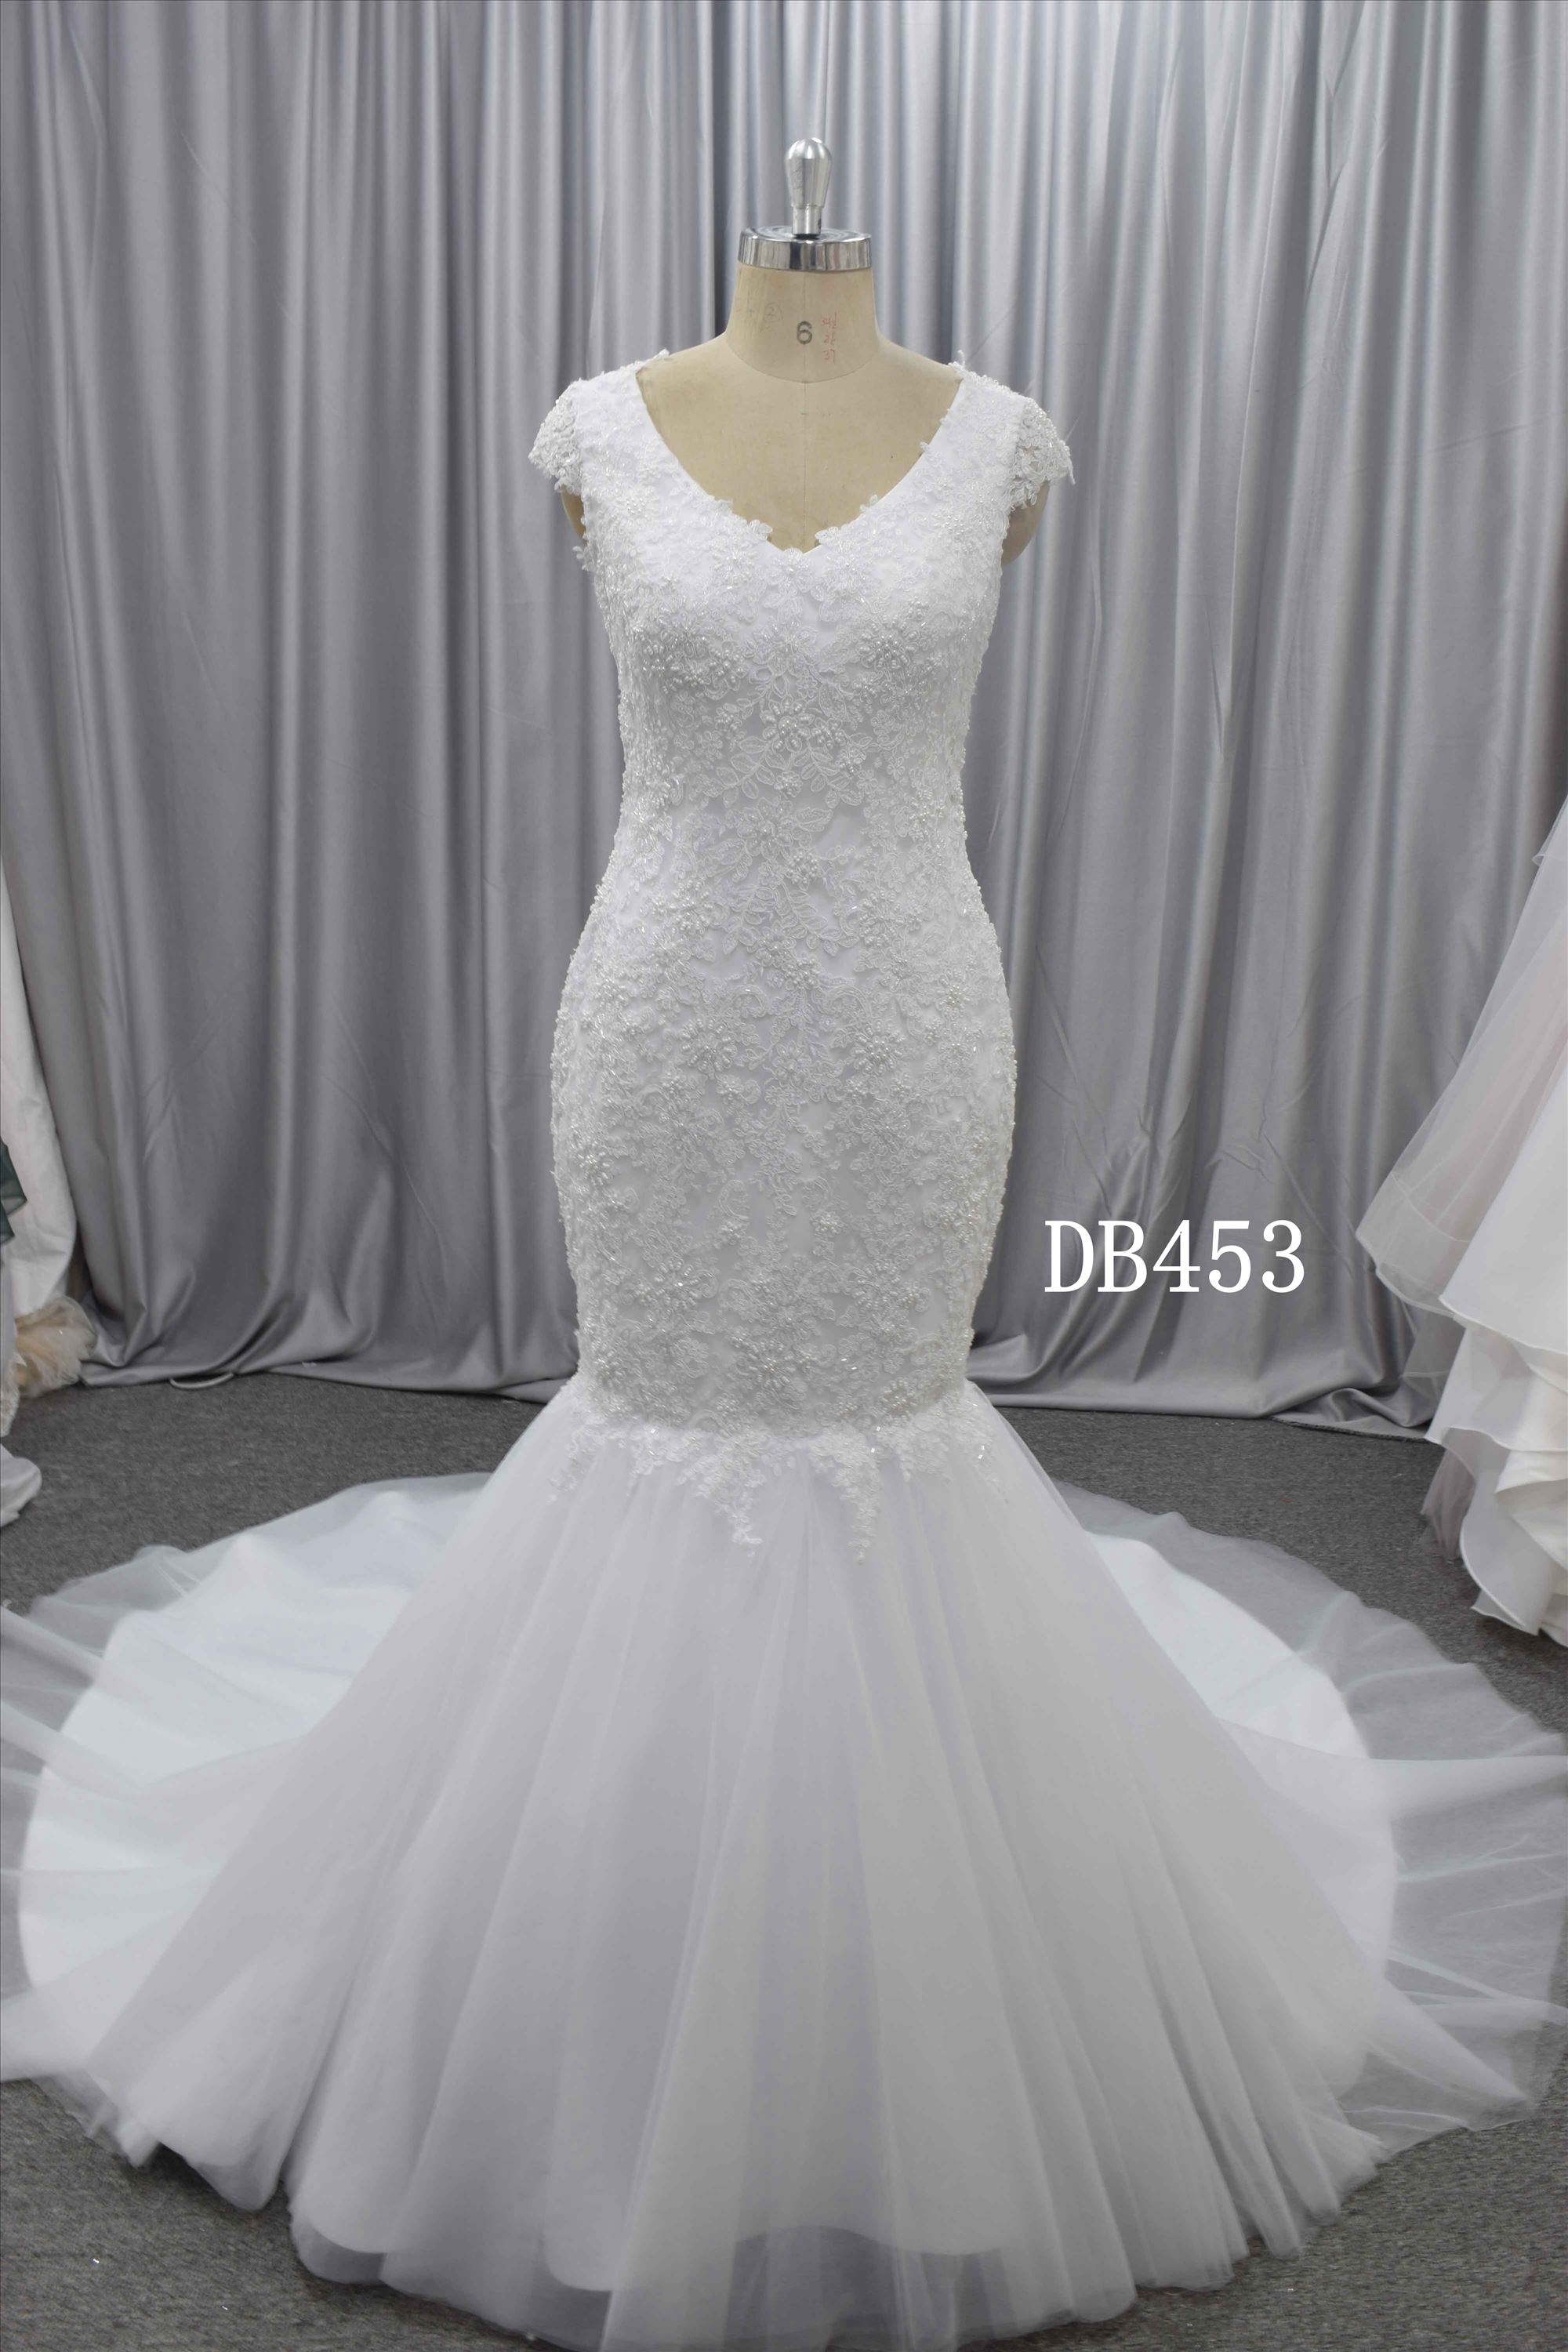 Beautiful mermaid wedding dress with delicate lace and beading